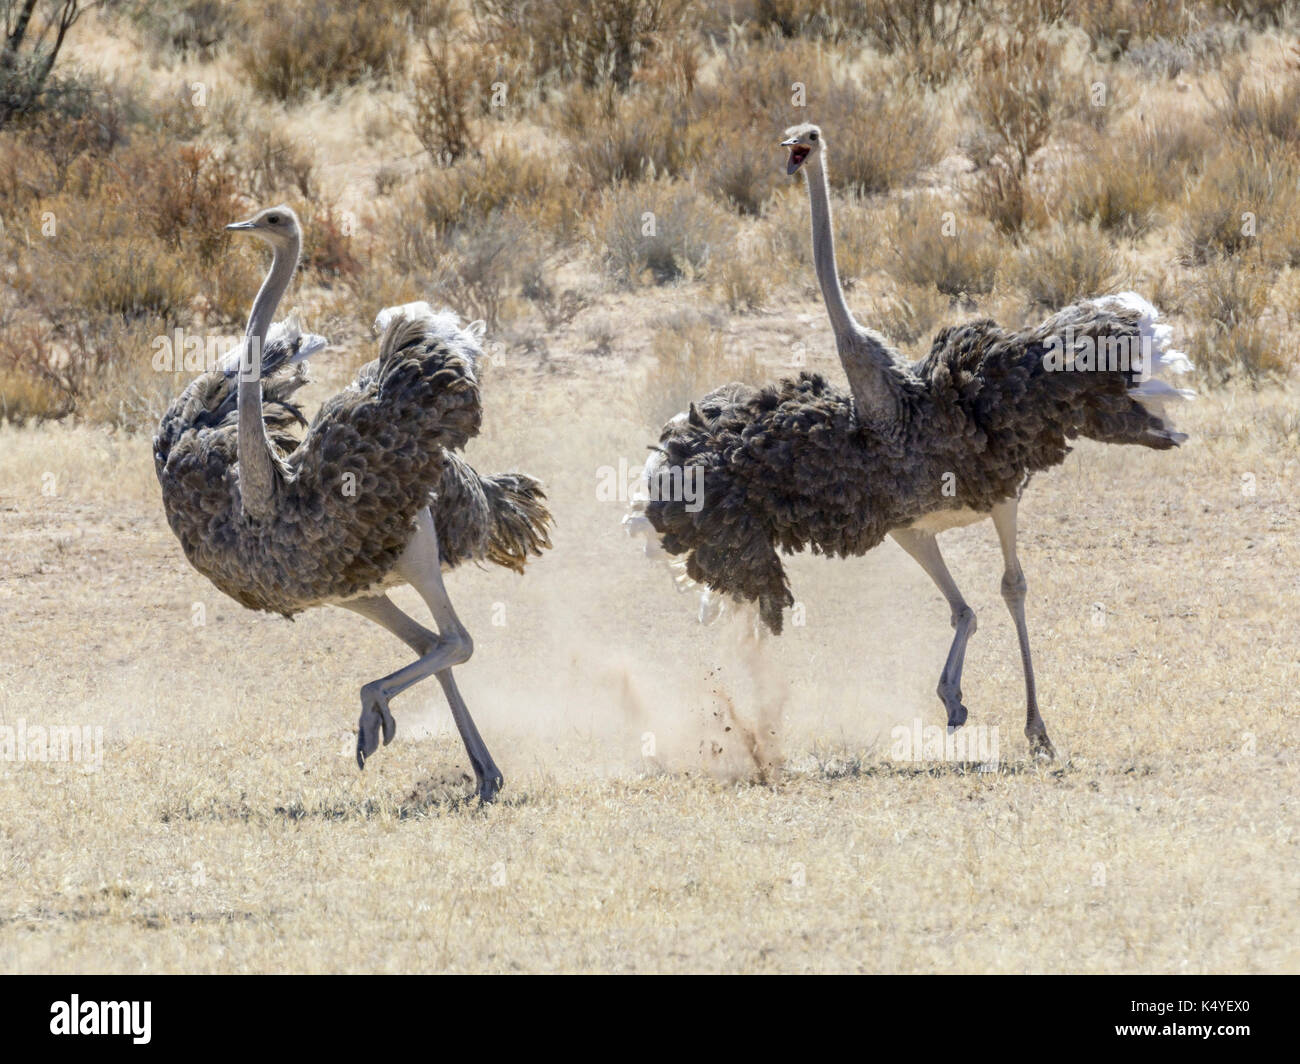 Ostriches (Struthio camelus) chasing each other, Kgalagadi Transfrontier National Park, North Cape, South Africa Stock Photo